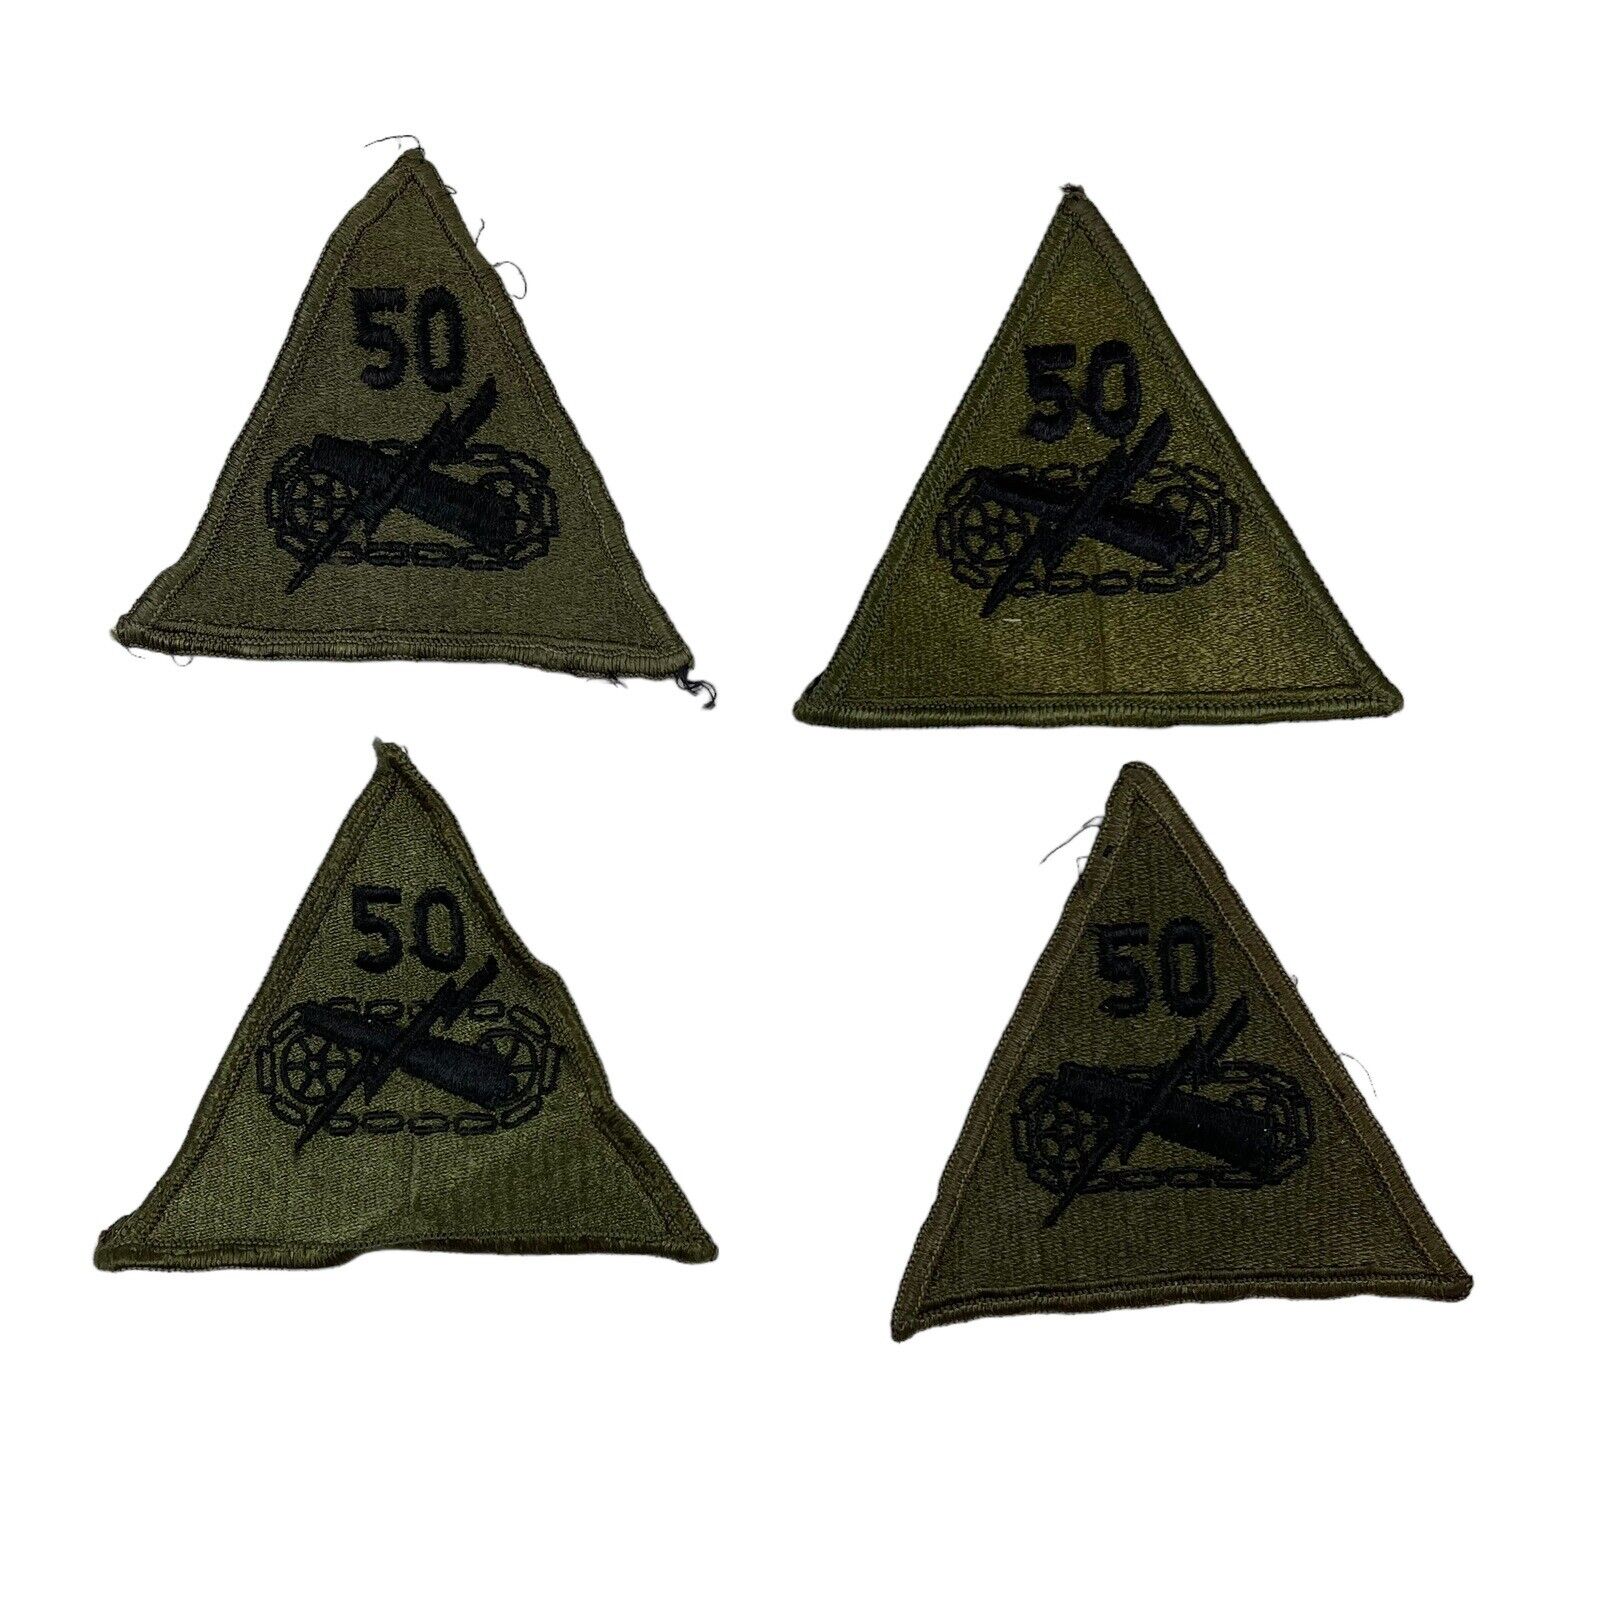 4 Vintage U.S. ARMY 50th ARMORED DIVISION Subdued Green & Black PATCHES LOT